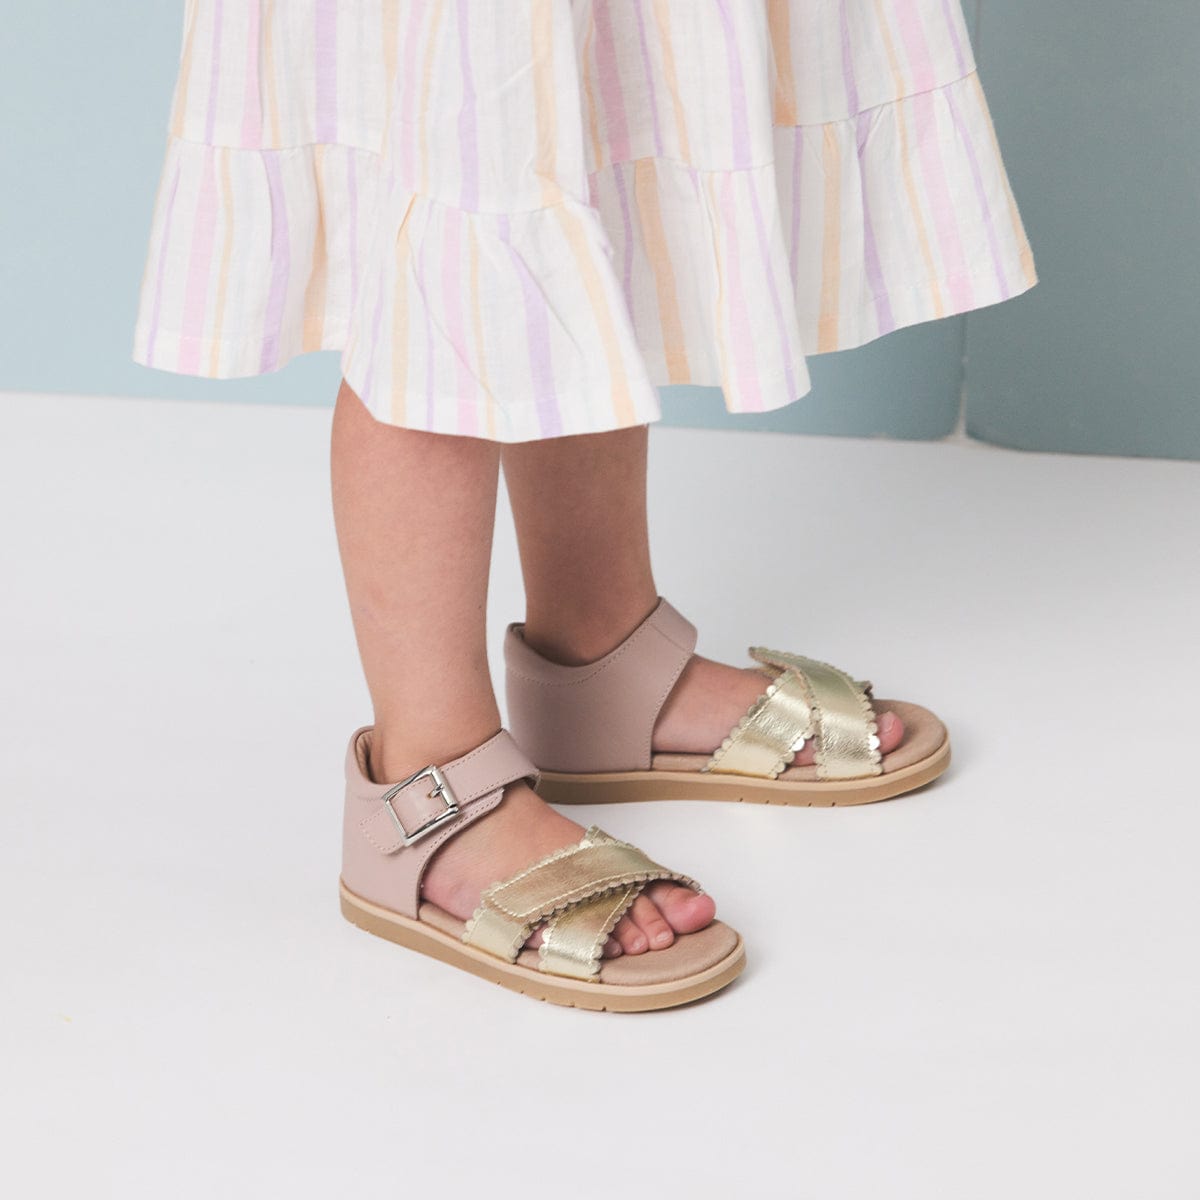 Pretty Brave Girls Shoes Willow Sandal in Blush/Gold